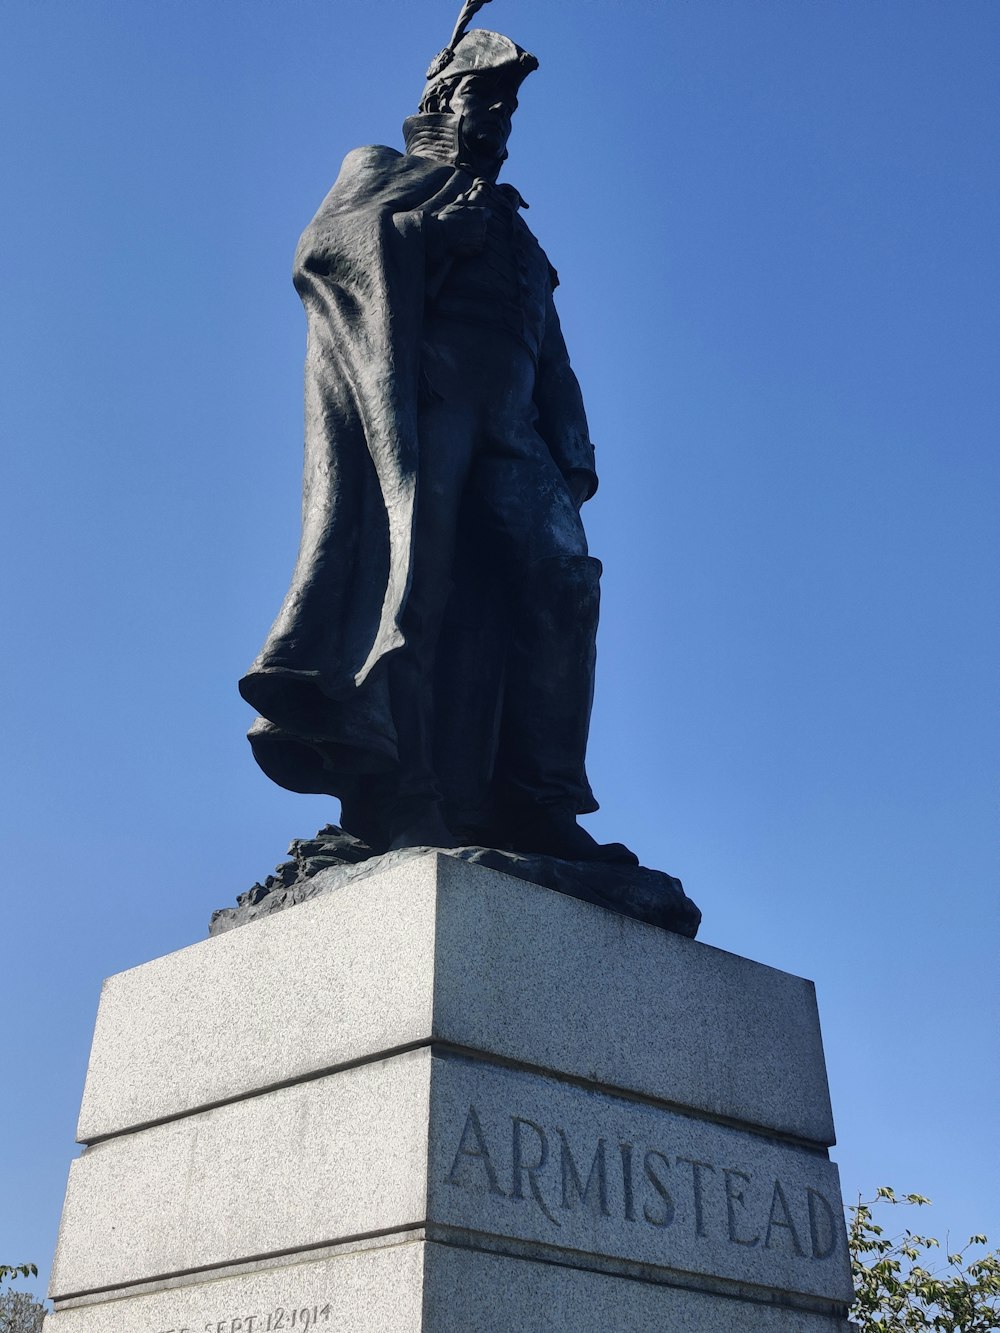 a statue of a man with a hat and cape